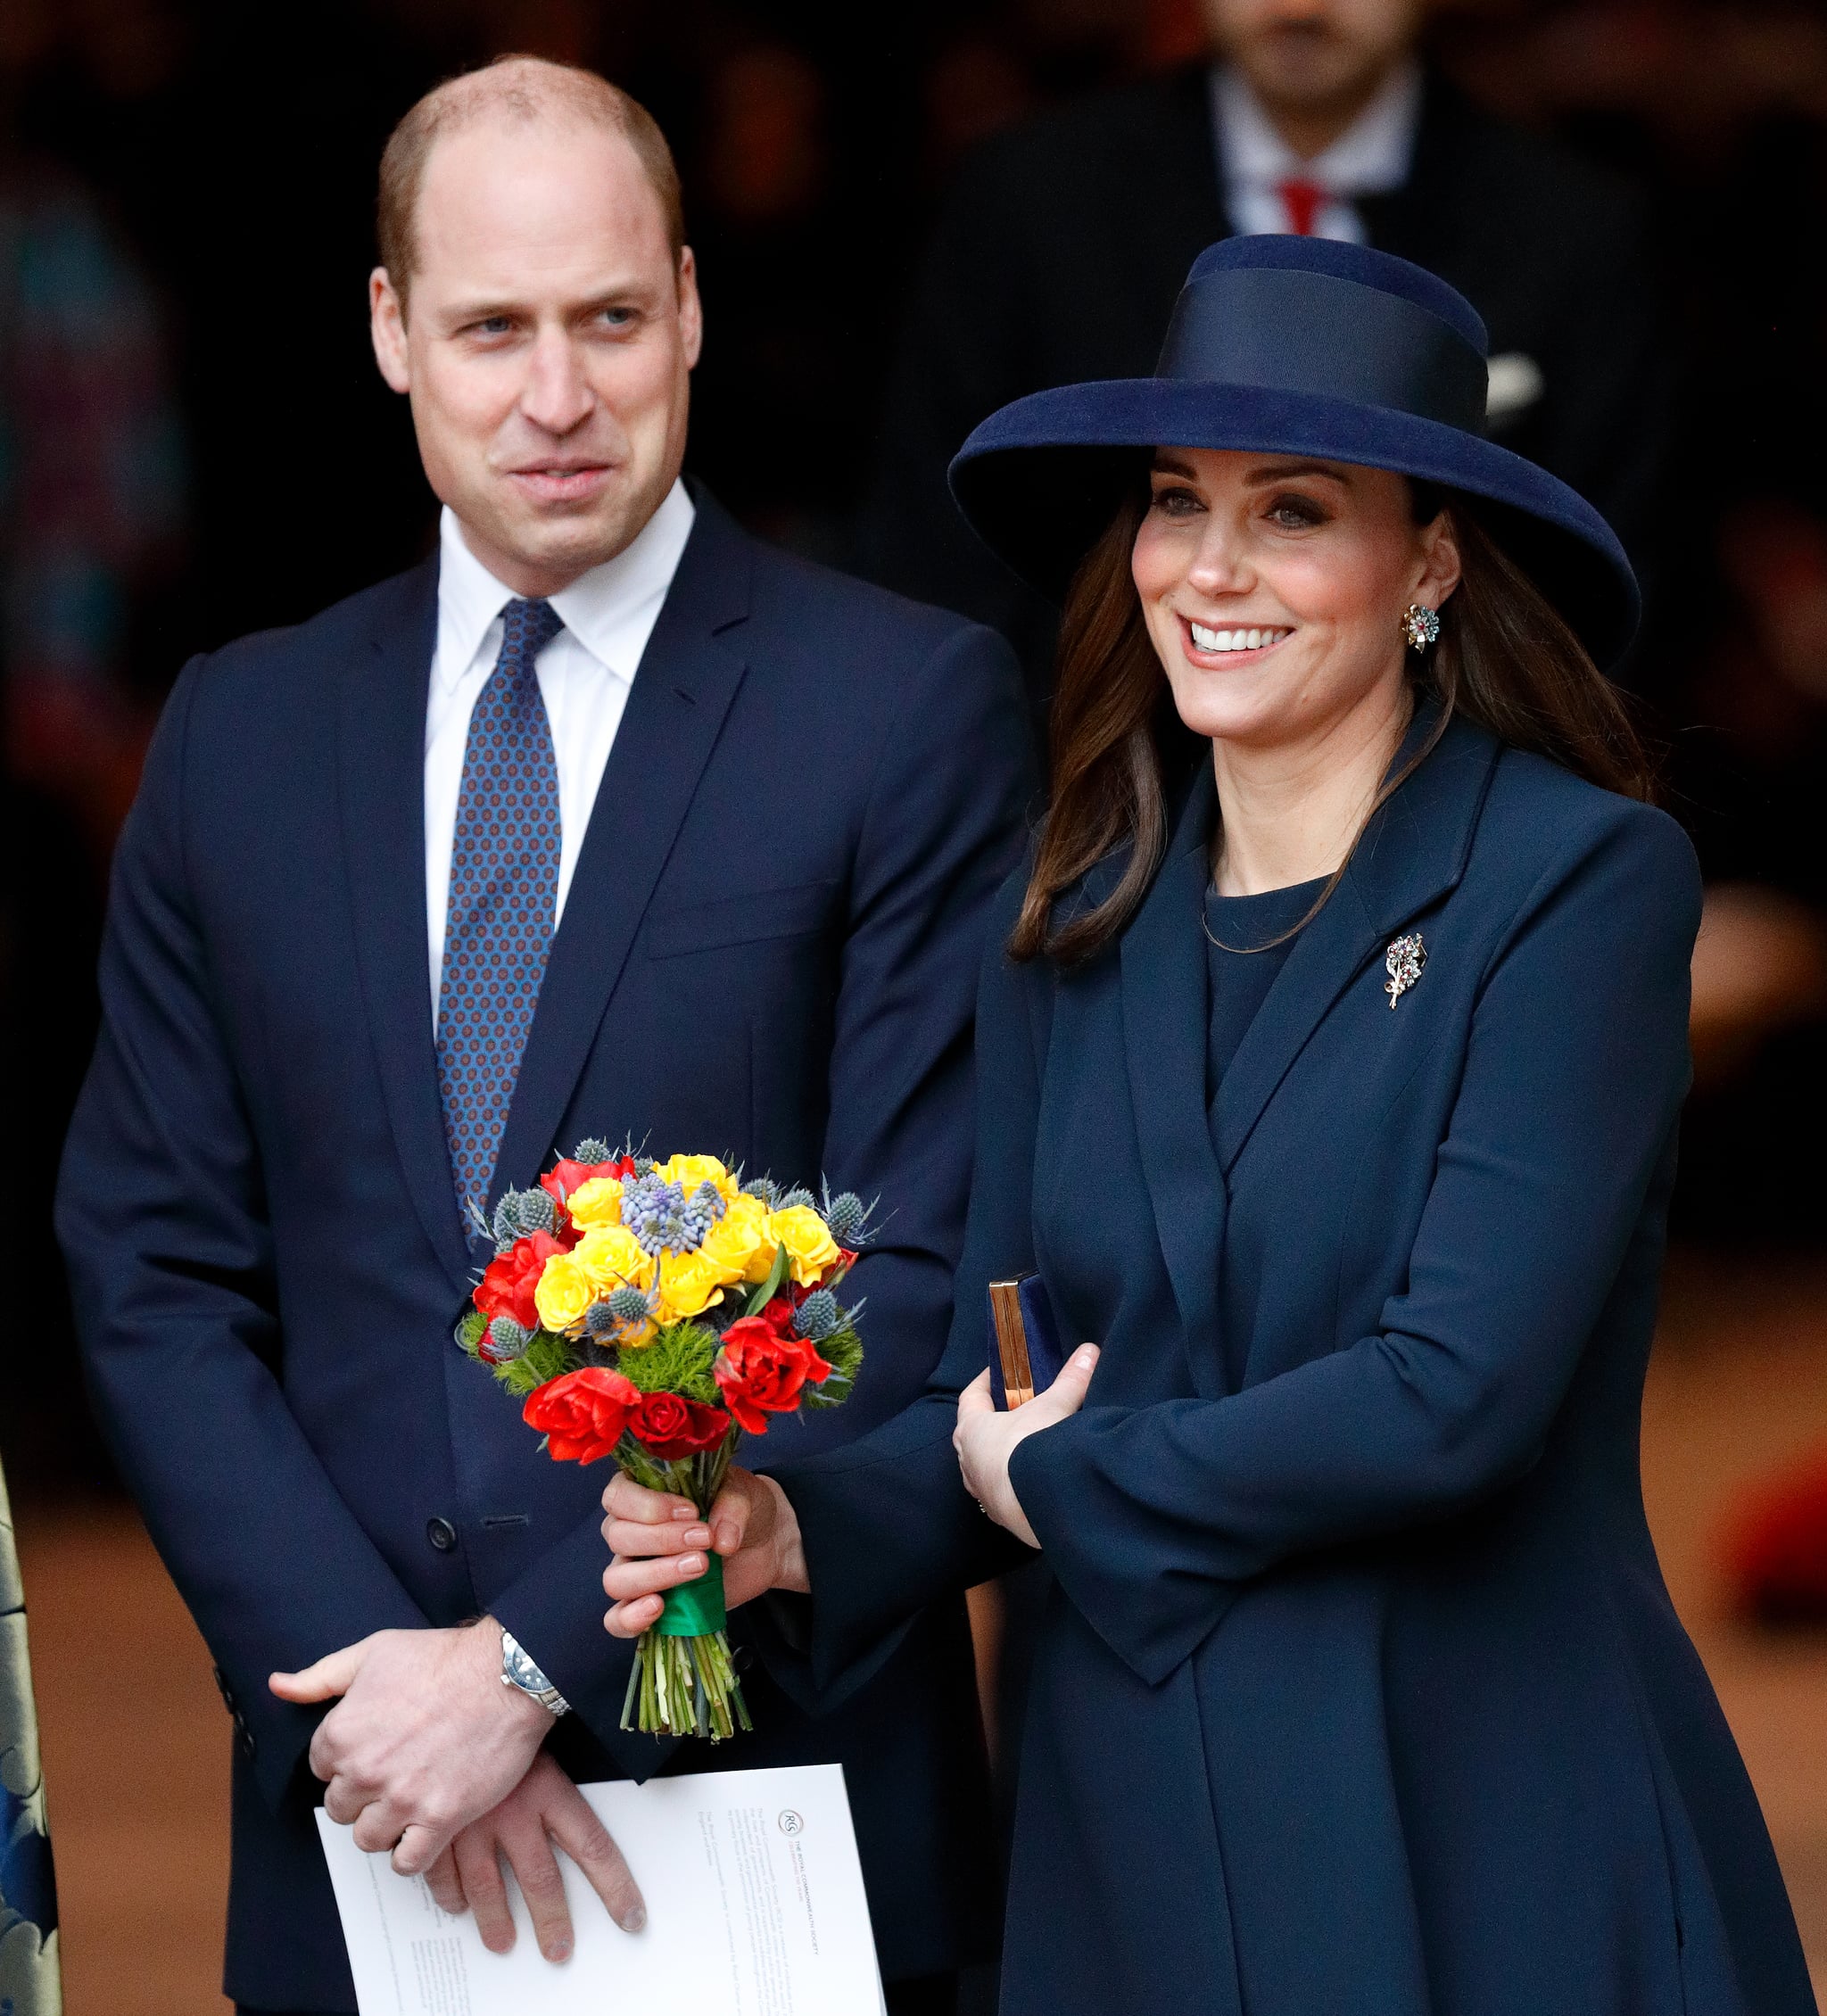 LONDON, UNITED KINGDOM - MARCH 12: (EMBARGOED FOR PUBLICATION IN UK NEWSPAPERS UNTIL 24 HOURS AFTER CREATE DATE AND TIME) Prince William, Duke of Cambridge and Catherine, Duchess of Cambridge attend the 2018 Commonwealth Day service at Westminster Abbey on March 12, 2018 in London, England. (Photo by Max Mumby/Indigo/Getty Images)